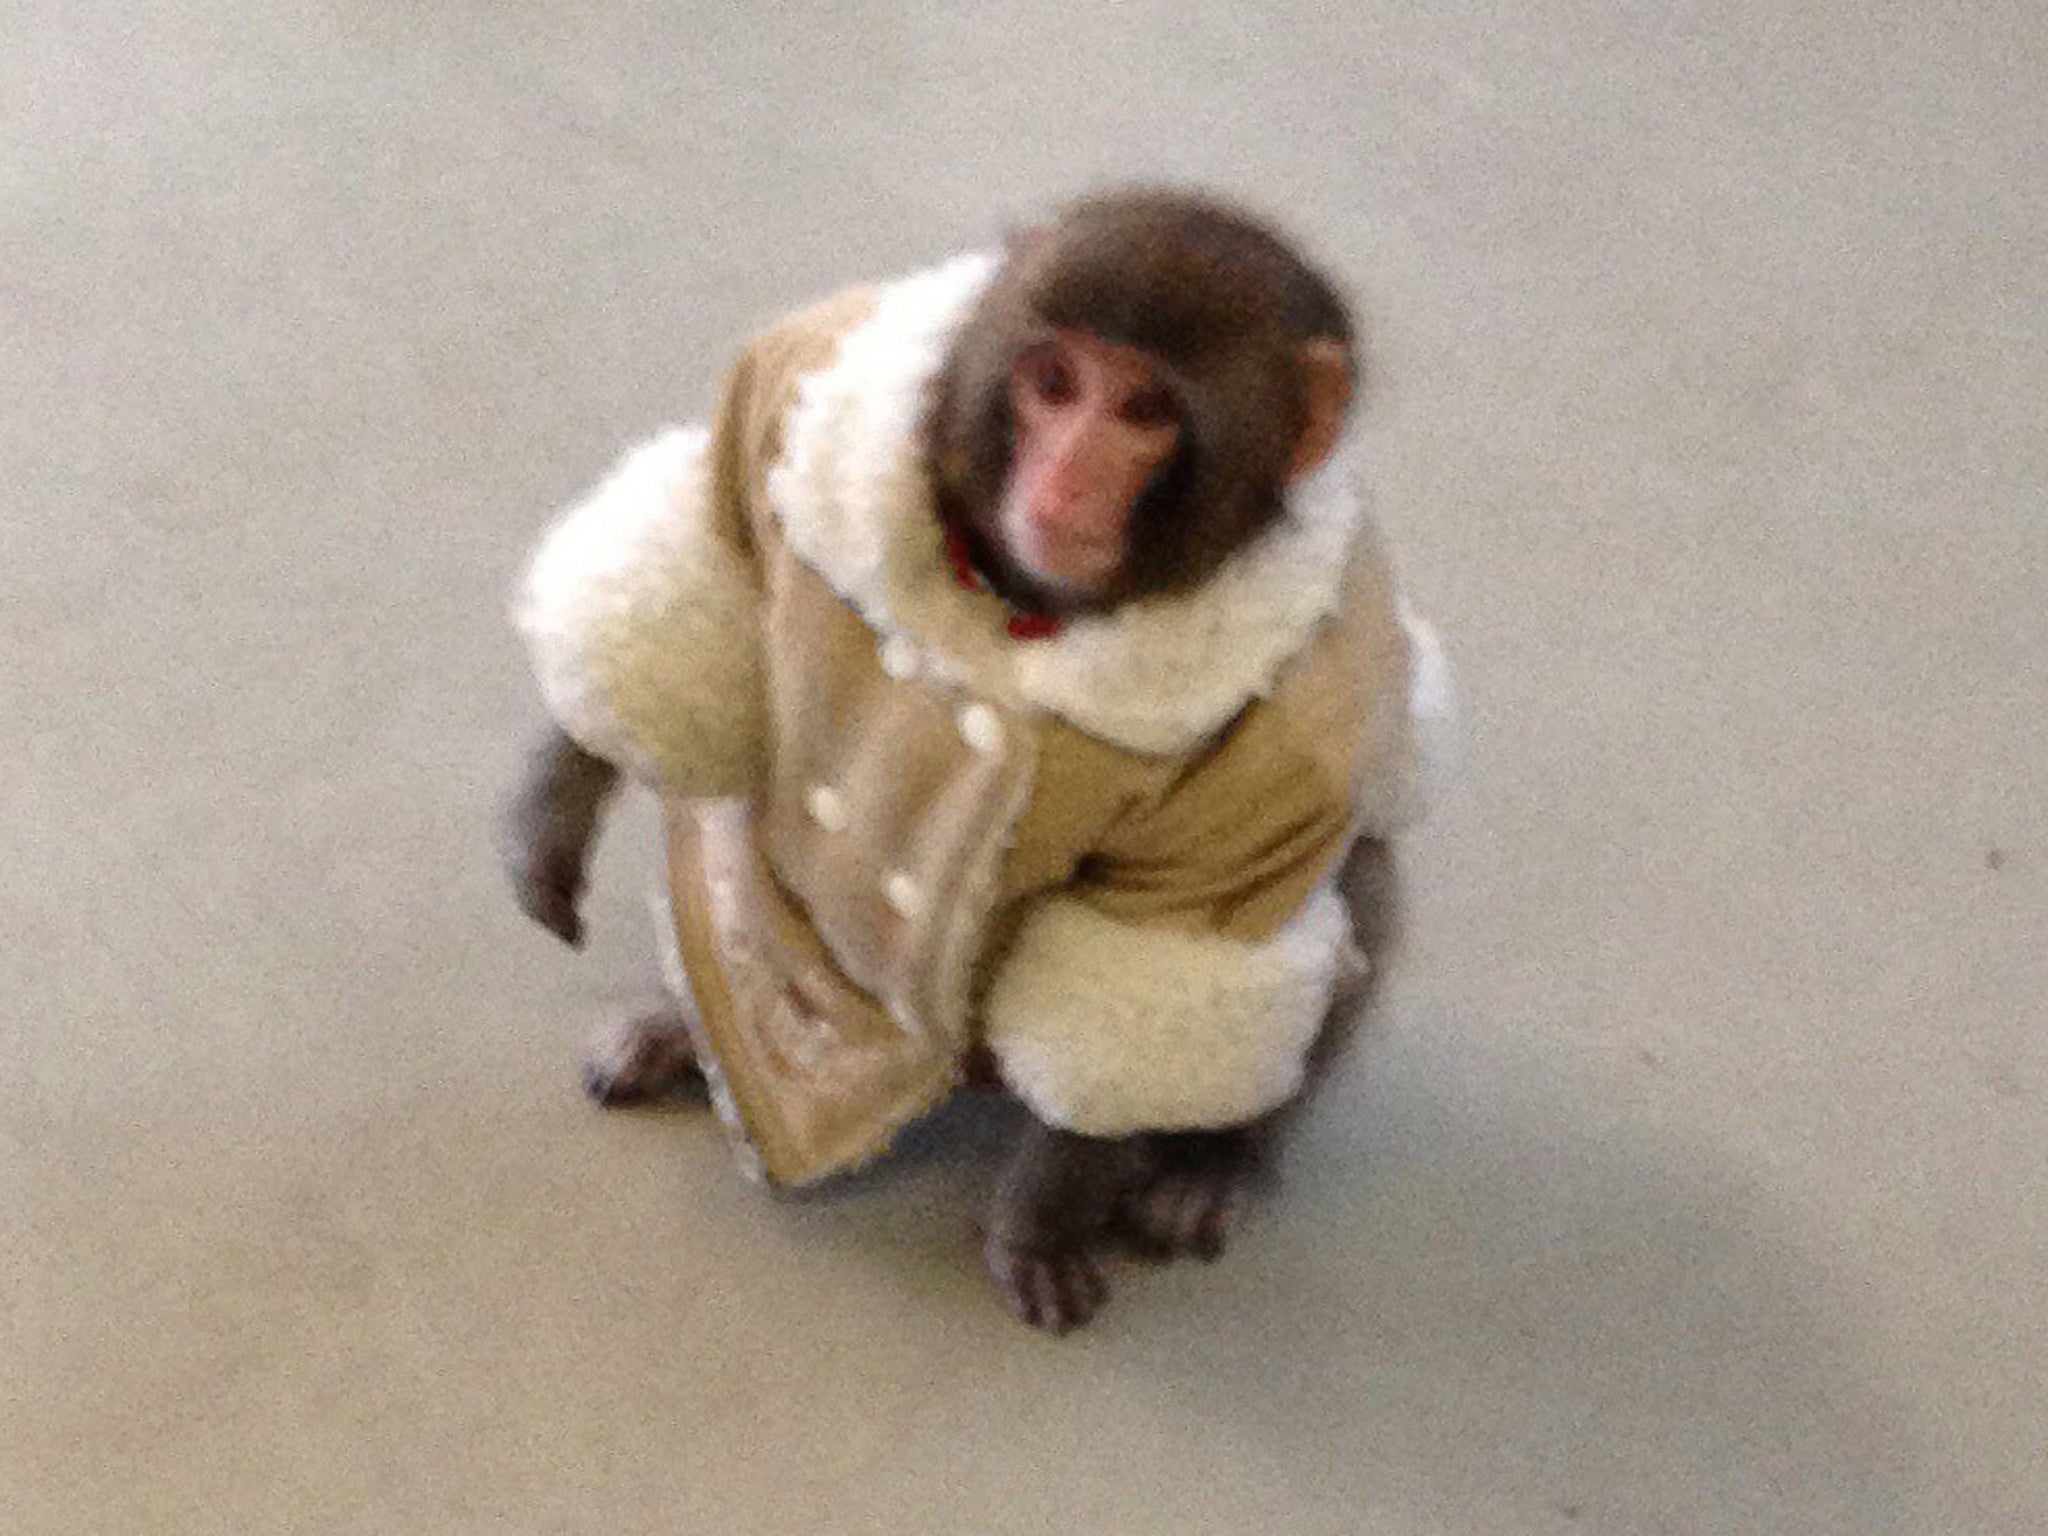 Darwin the Monkey: Darwin became an unlikely style icon when he was found wandering around a Toronto Ikea store wearing a jacket that the late Manchester City manager Malcolm Allison would have been proud of